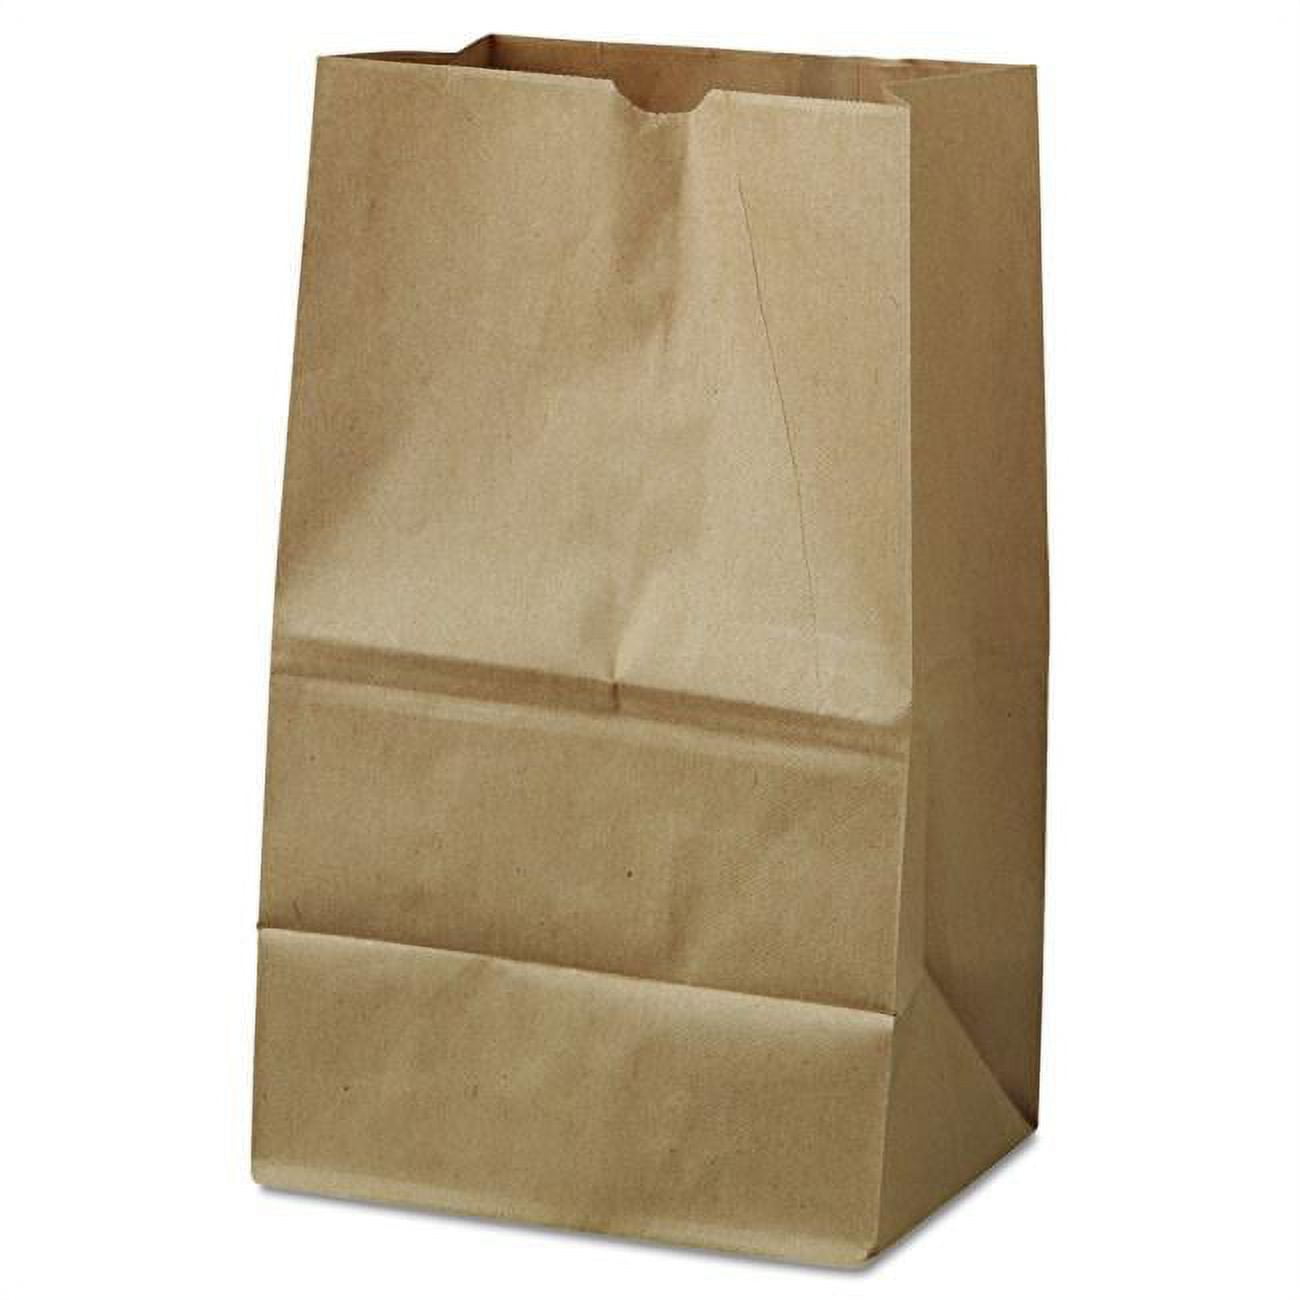 Duro Hilex Poly 18421 Grocery Bag - Case Of 500